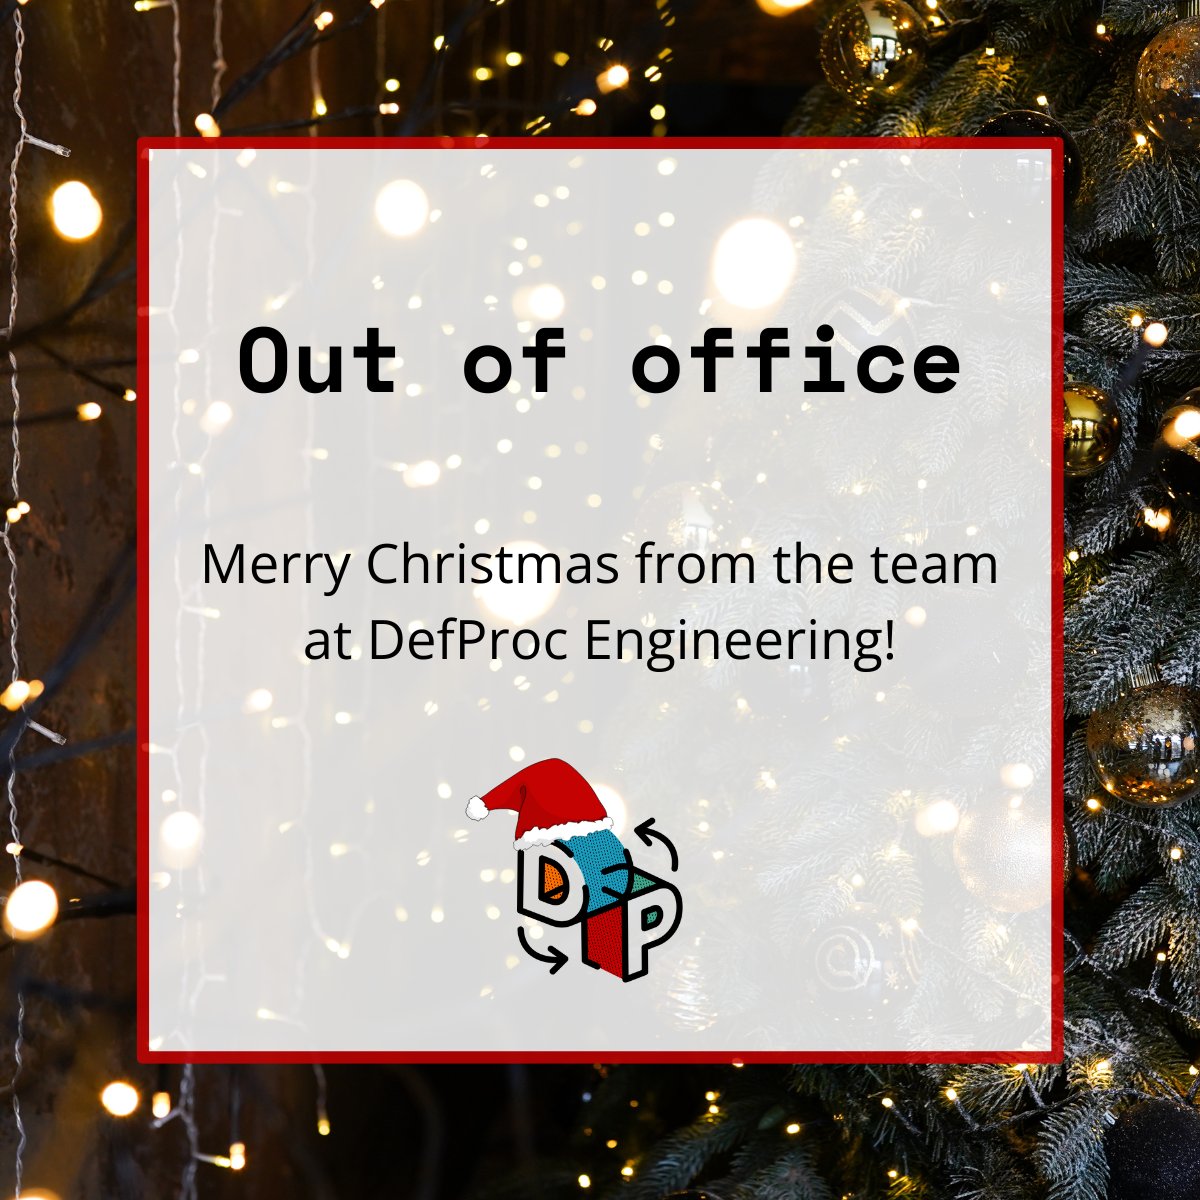 We'll be back in the office on the 8th of January. Merry Christmas and Happy New Year!